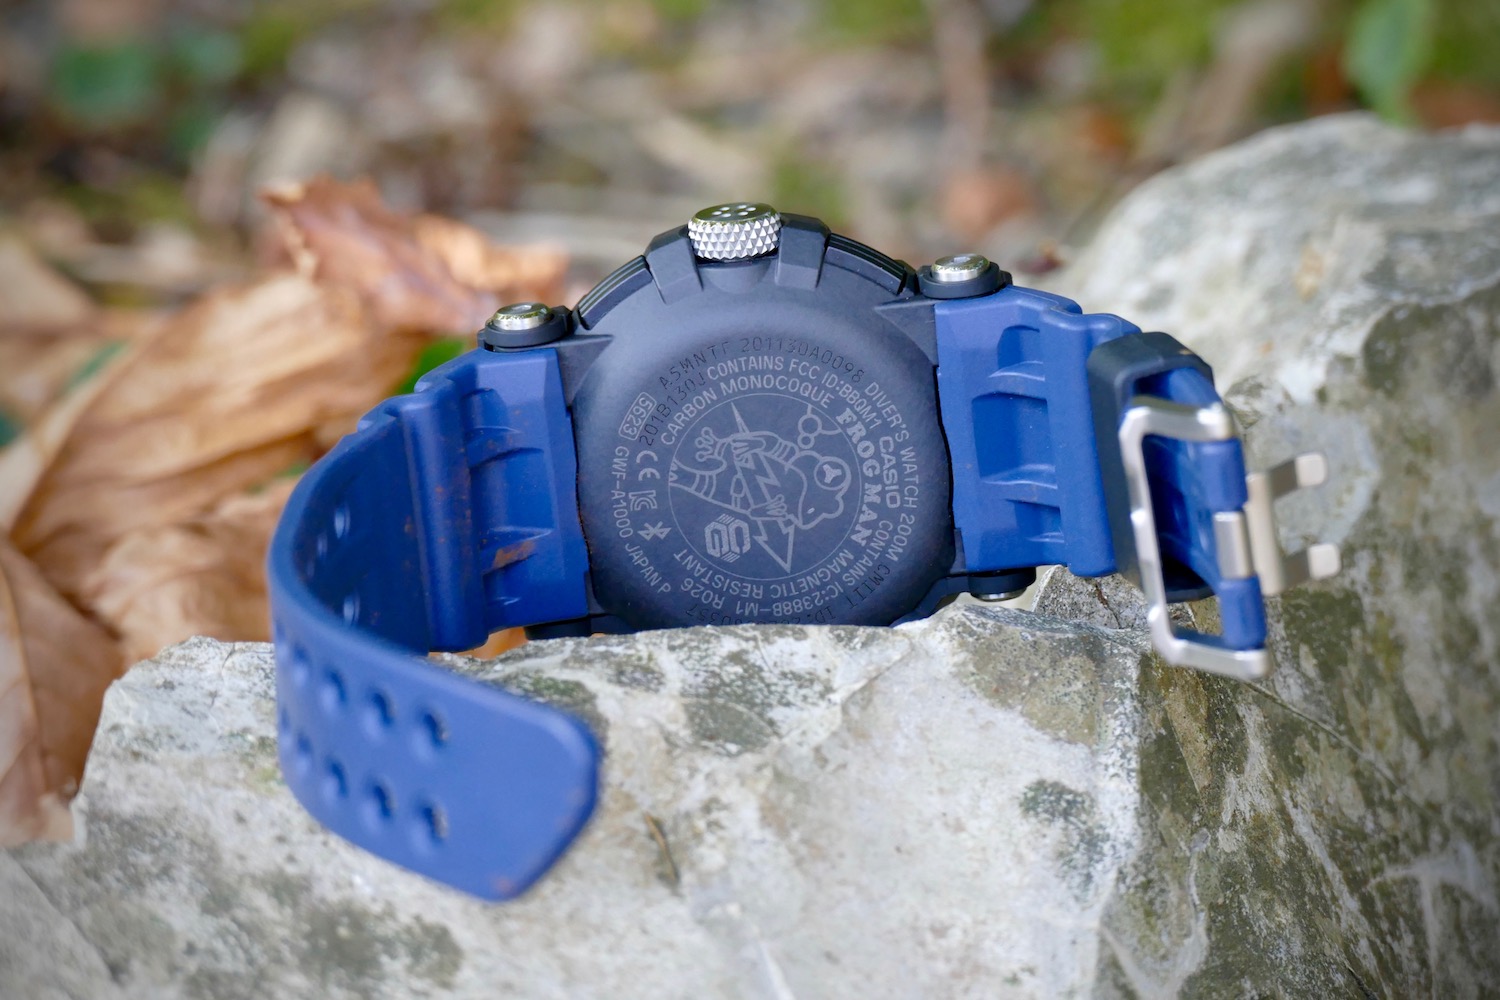 G-Shock GWF-A1000 Frogman Review: Worth Splashing Out On 